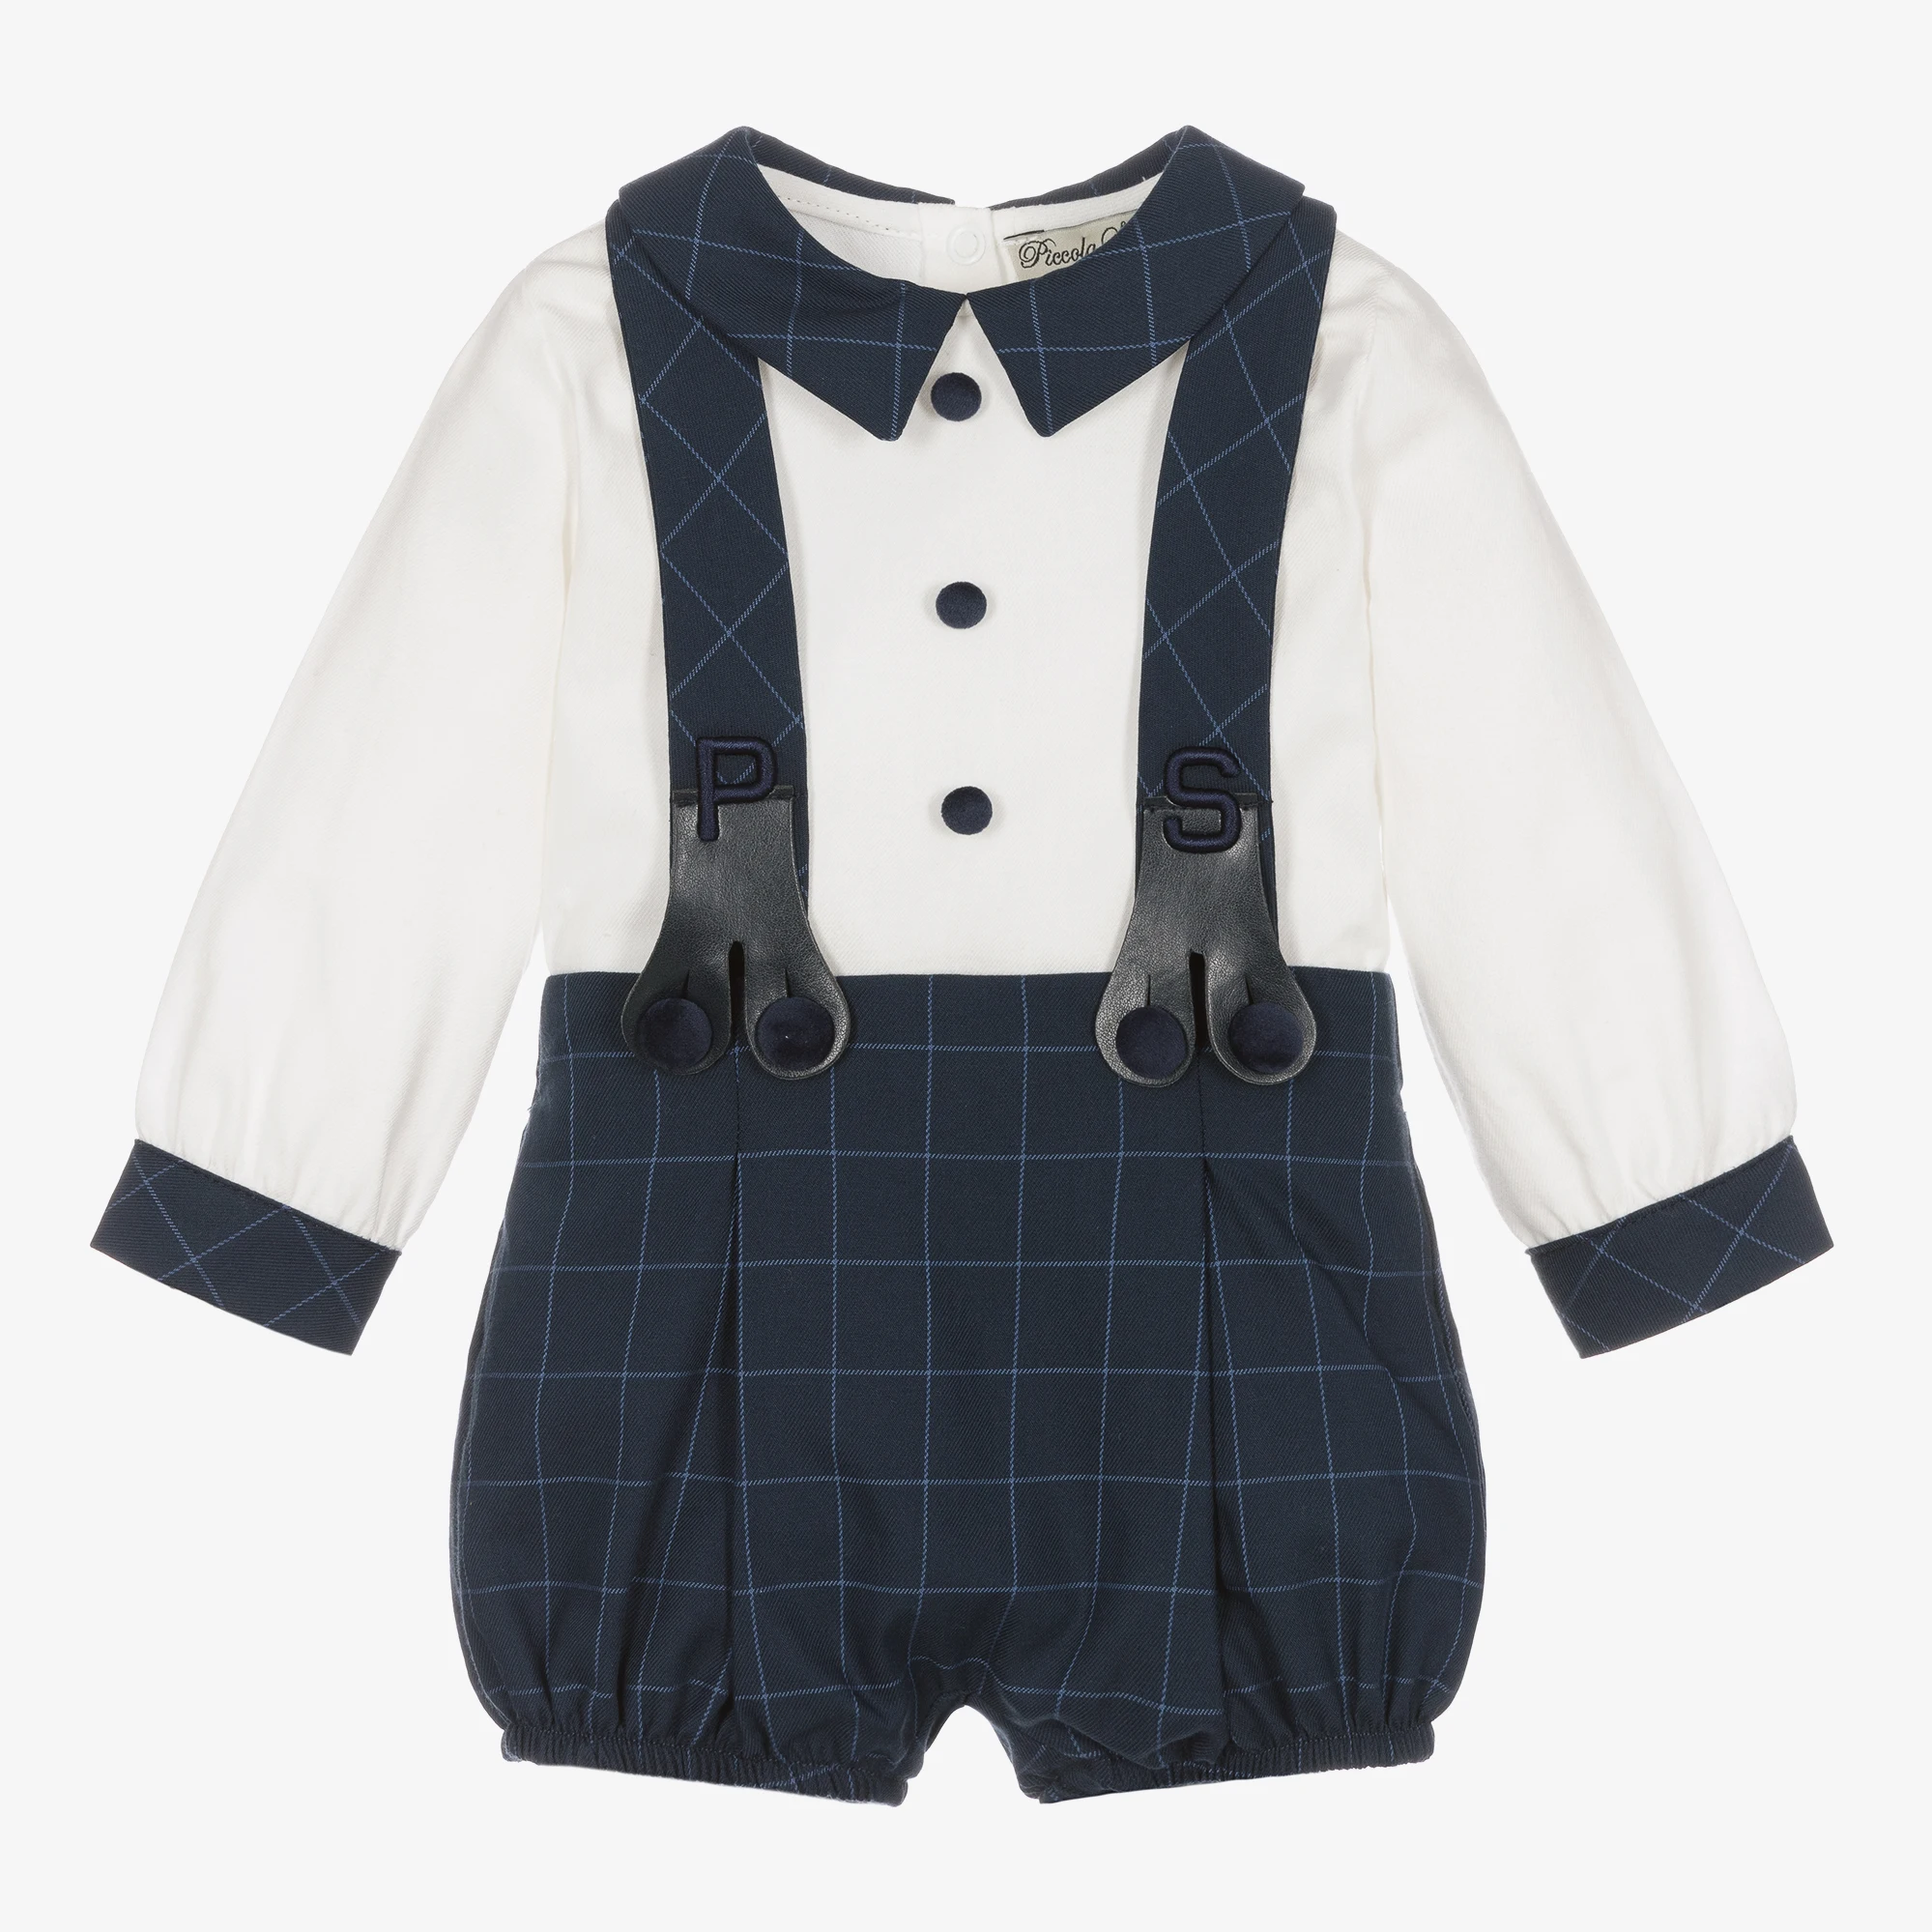 Gentleman boys clothing sets for boys Classic  dress shirts and  overall shorts 2 pcs vintage children Customized styles